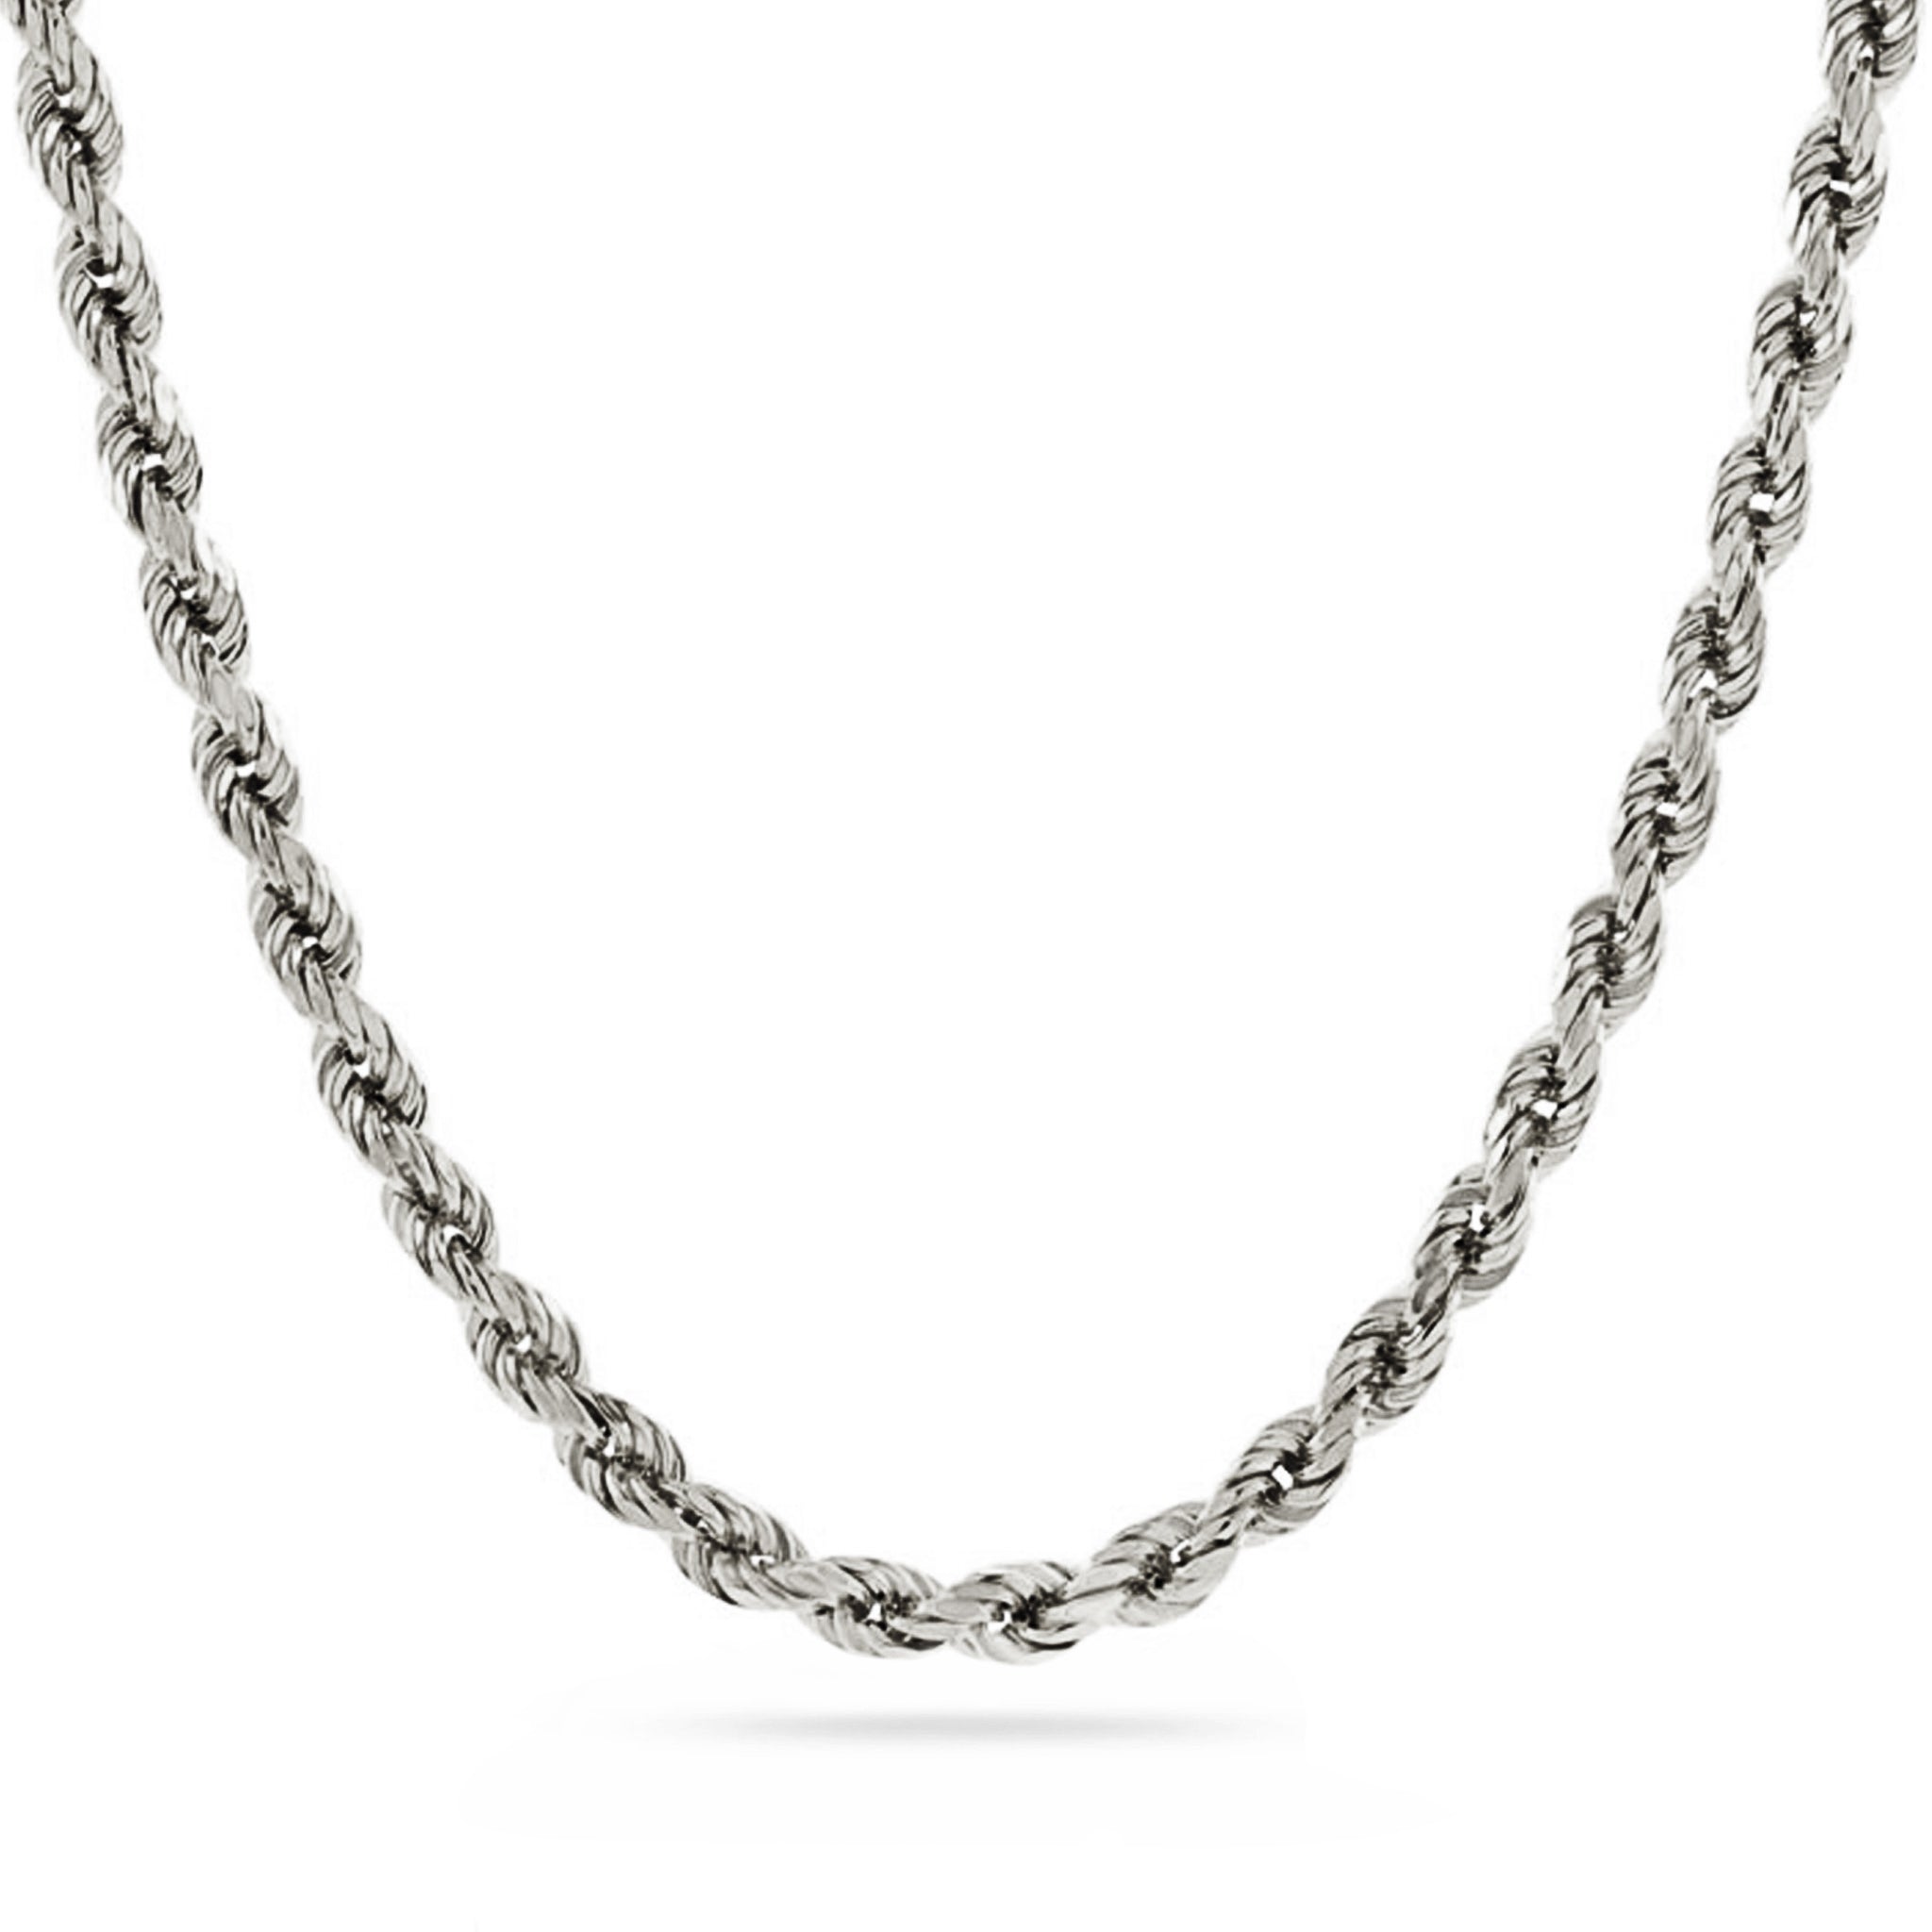 4mm Silver Rope Chain, Silver Chain for Men, Diamond Cut Rope Necklace -  Proclamation